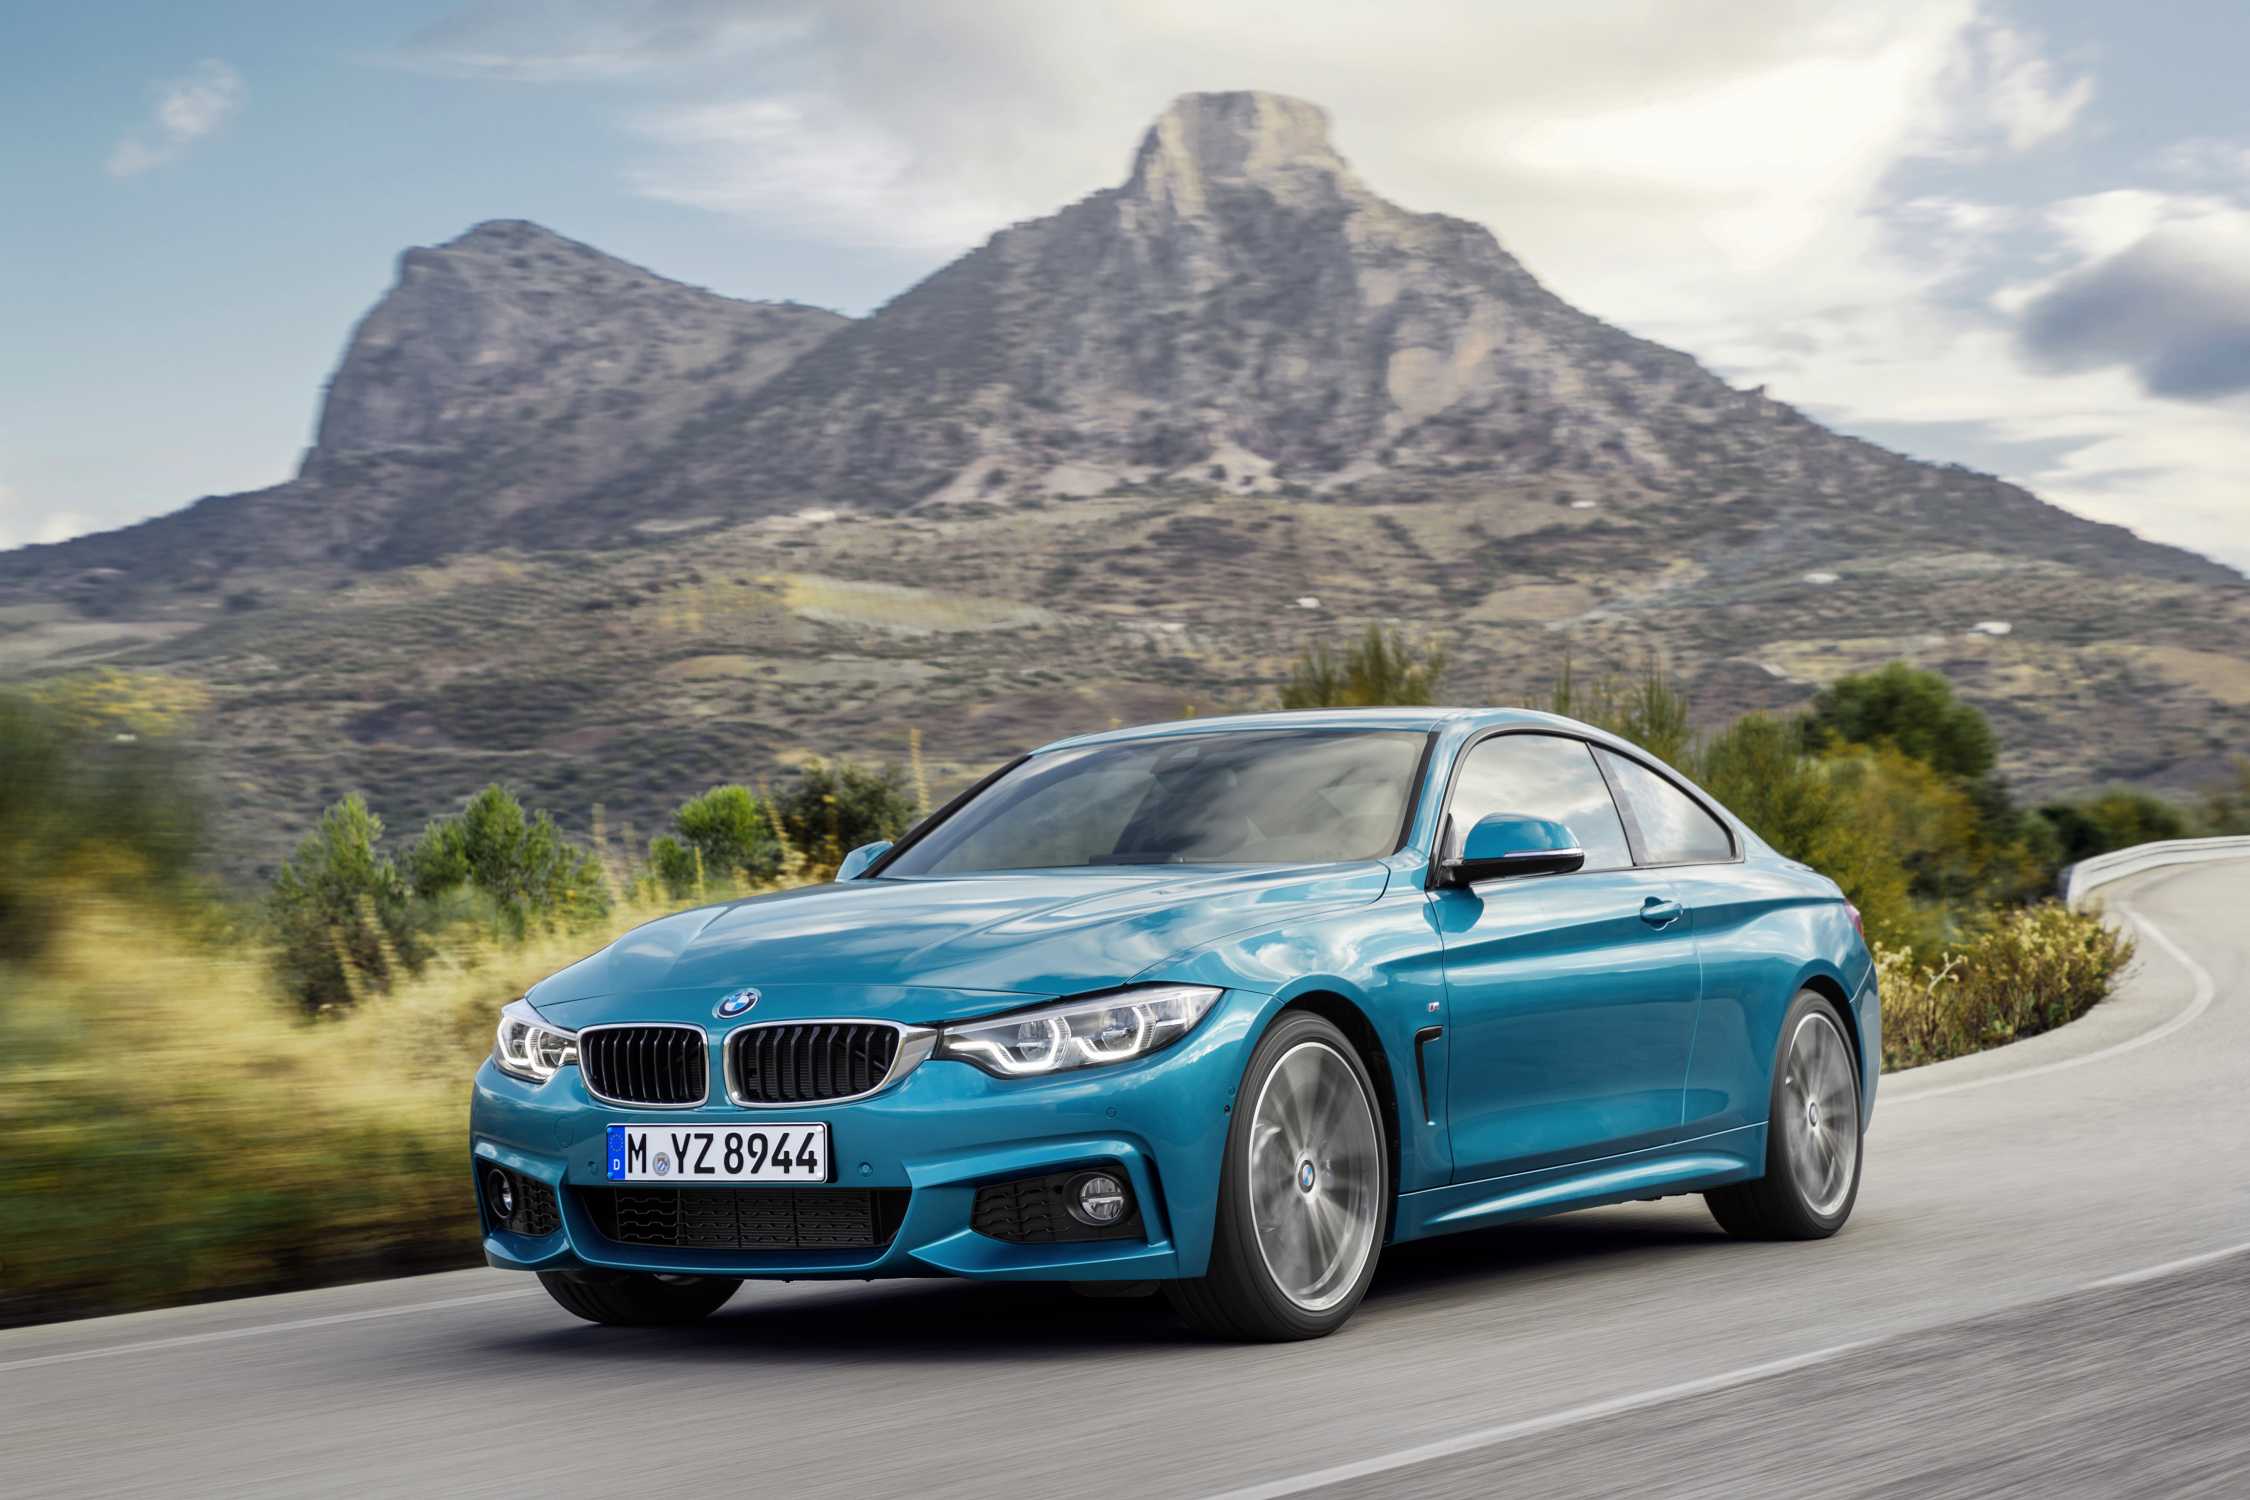 The new BMW 420i Coupe Sport